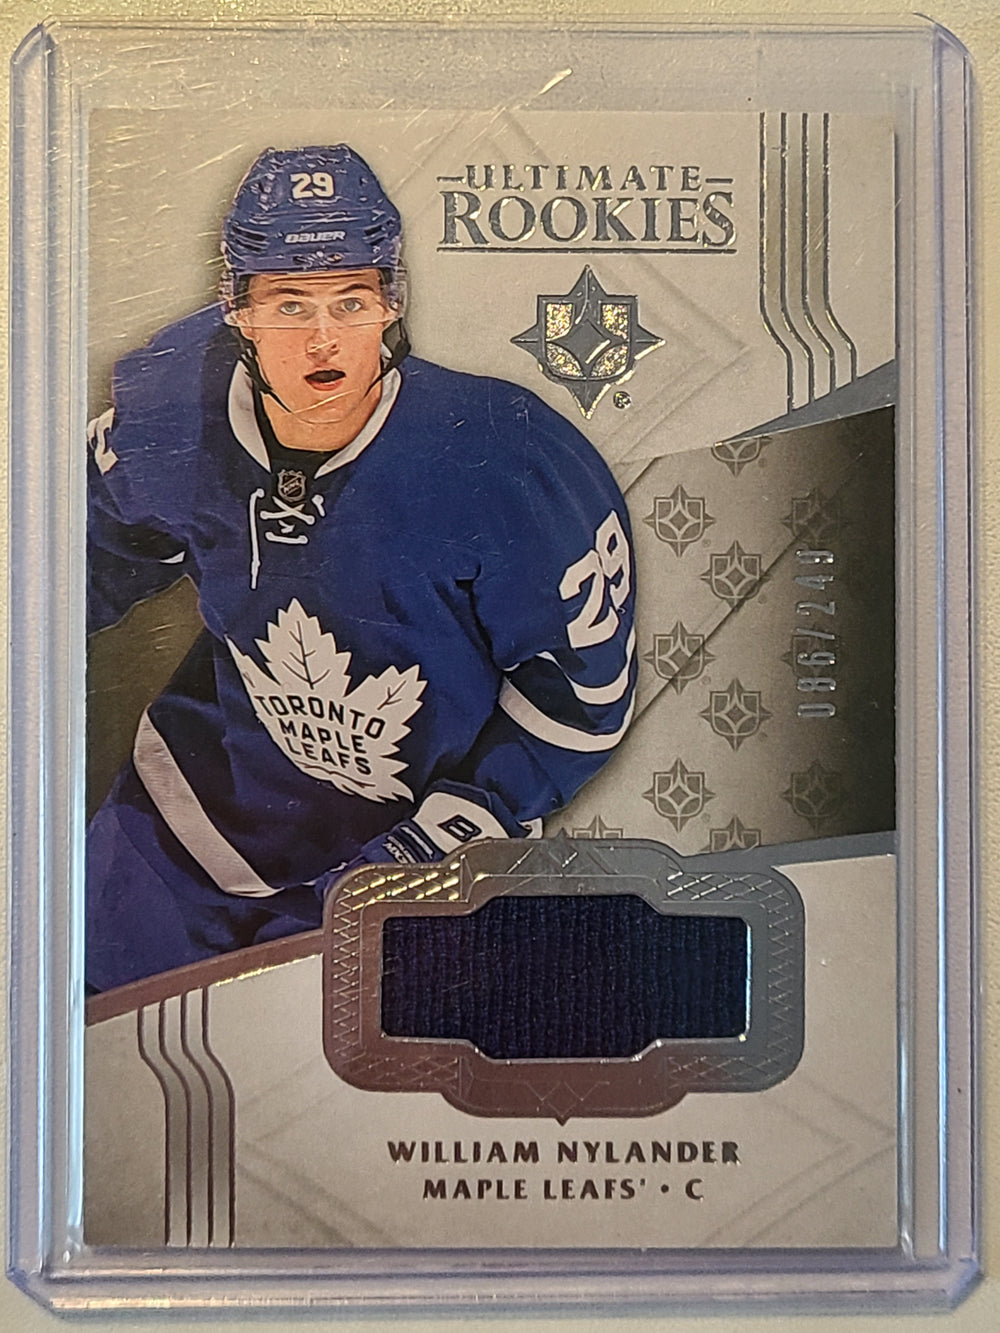 2016-17 Ultimate Collection Rookies Jersey #156 William Nylander Toronto Maple Leafs 86/249